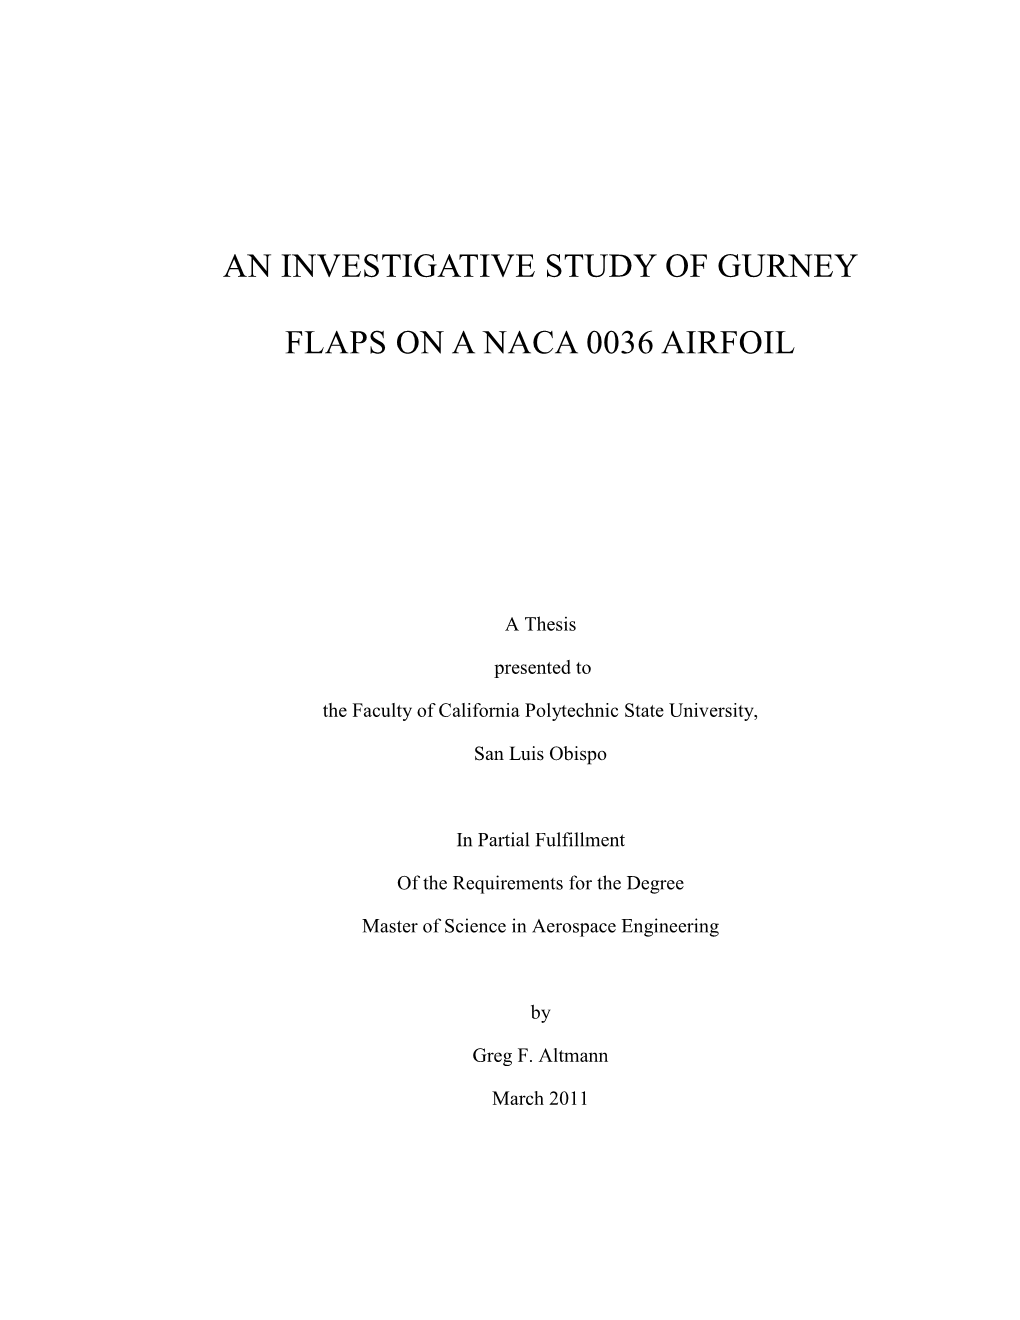 An Investigative Study of Gurney Flaps on a NACA 0036 Airfoil